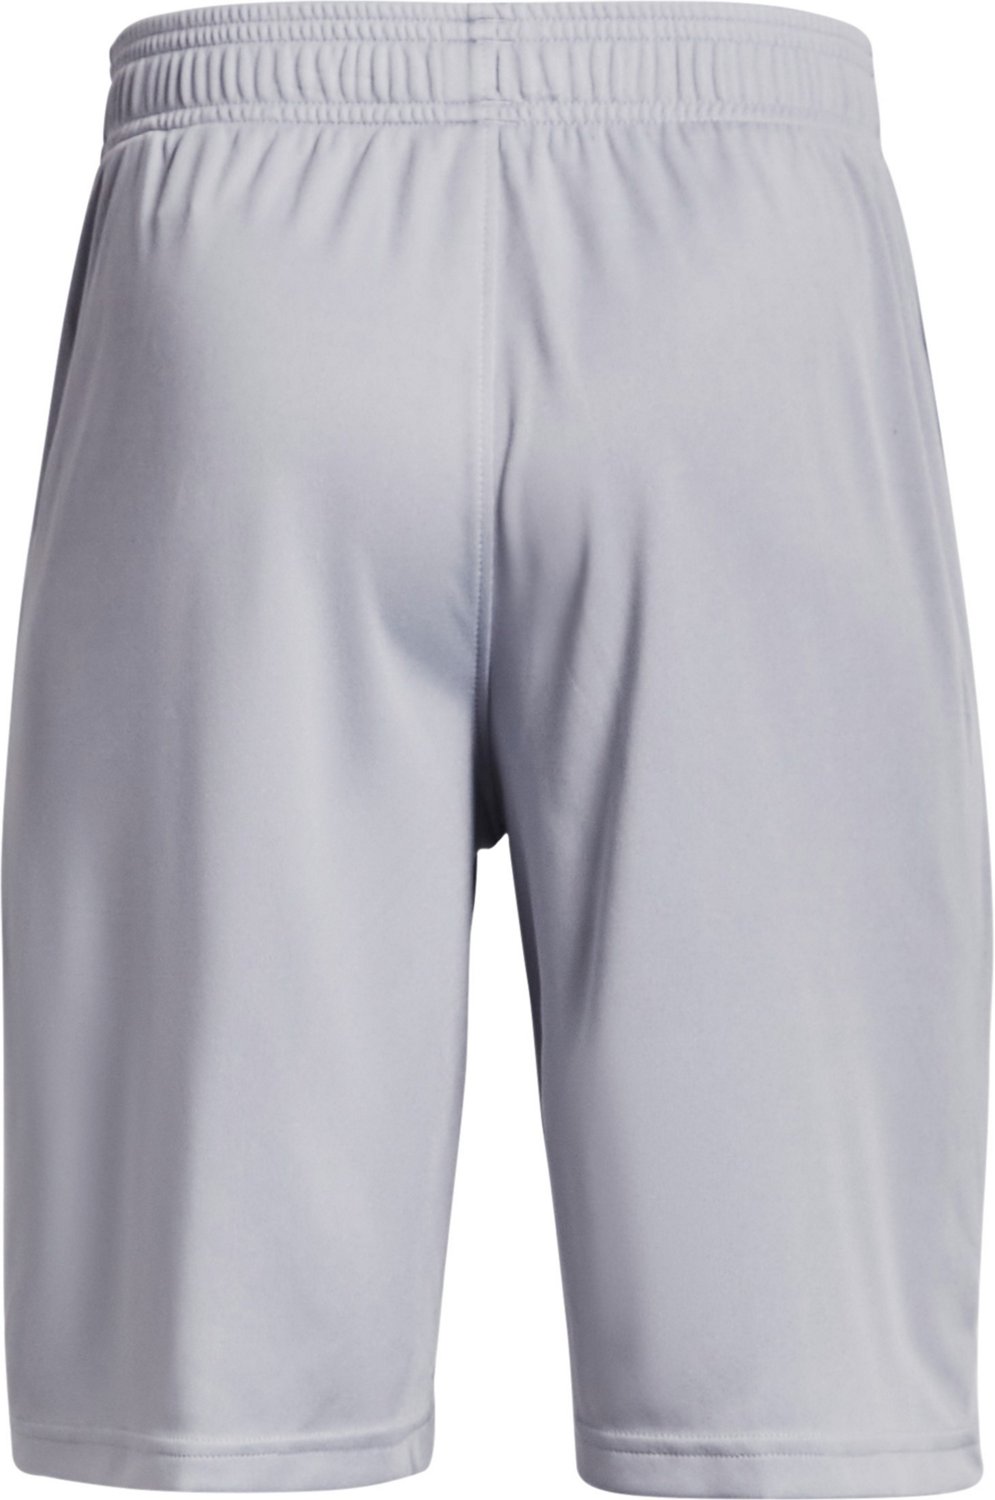 Sports /& Outdoors Under Armour Y Challenger Ii Knit Boy/'s Short